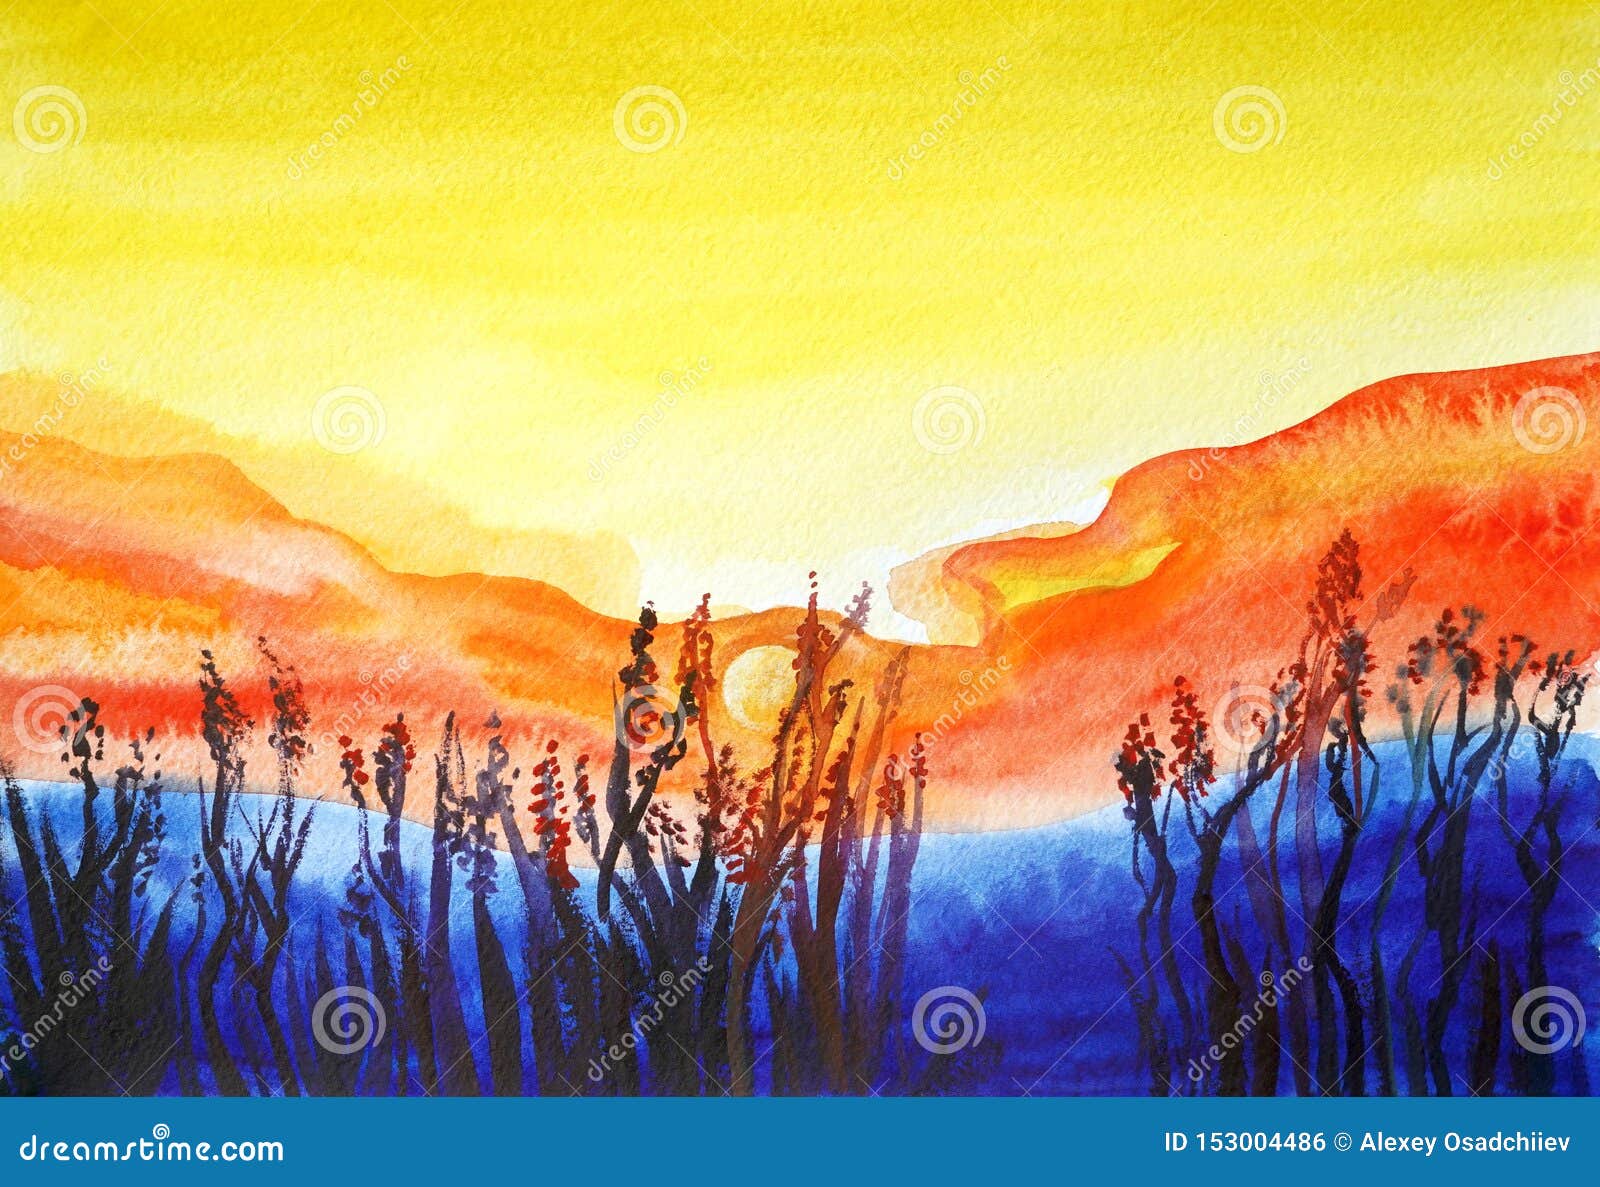 Drawing Of Bright Sunset Sunrise Over The Sea Or Blue Mountains